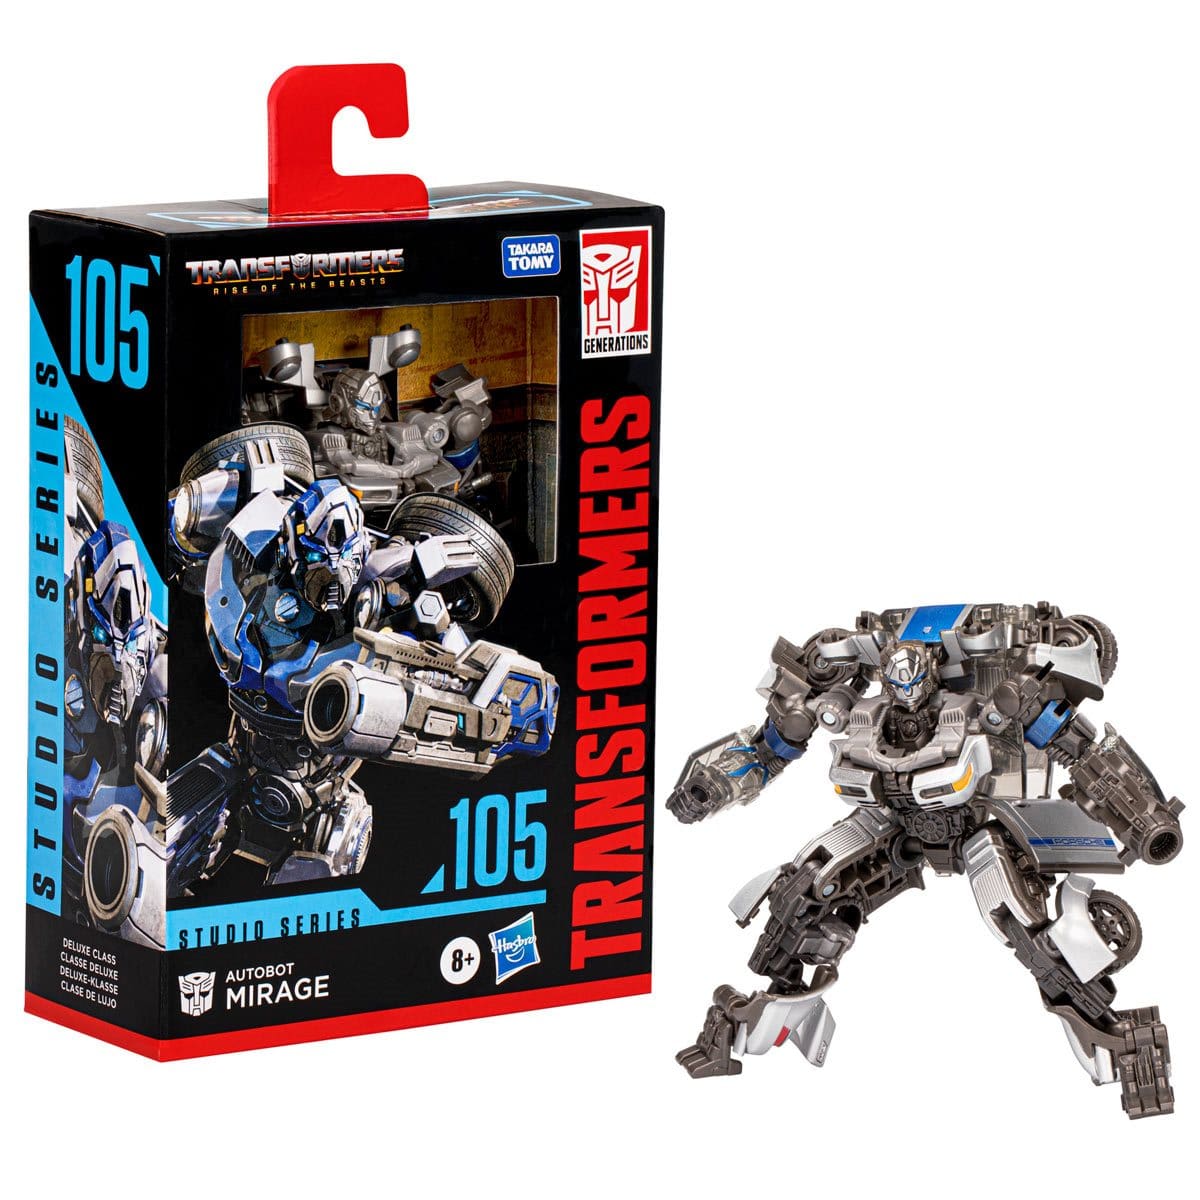 HASBRO TRANSFORMERS STUDIO SERIES DELUXE TRANSFORMERS: RISE OF THE BEASTS 105 AUTOBOT MIRAGE ACTION FIGURE